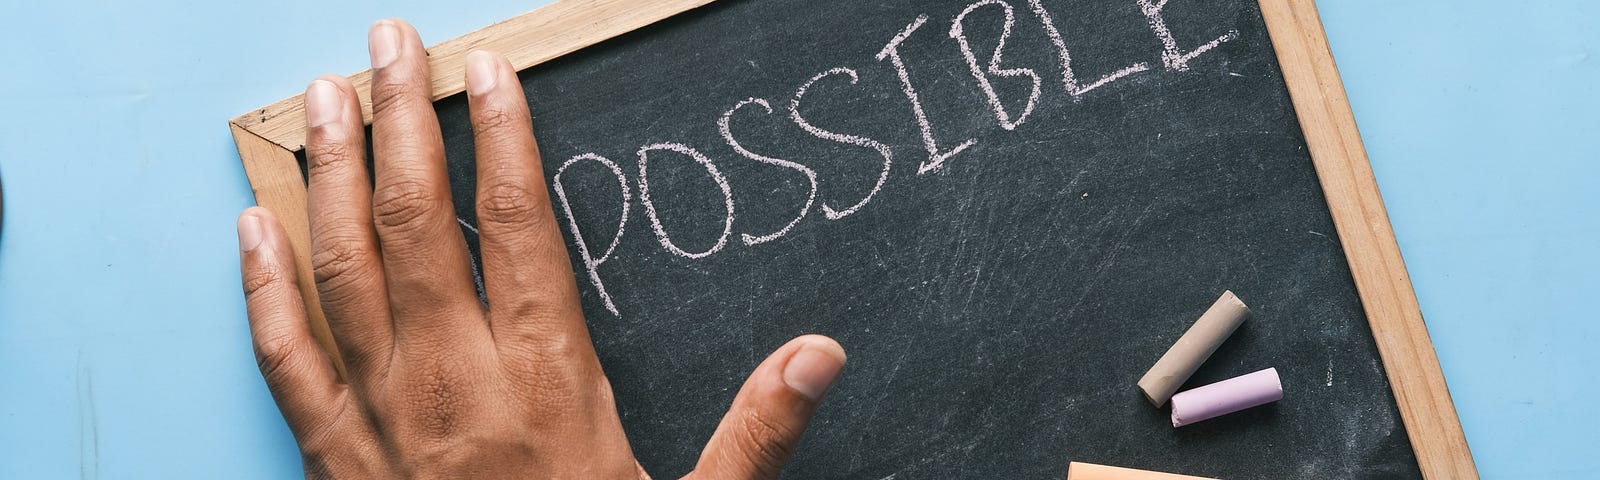 When opportunity knocks, be as ready as you can be. Turn impossible, into possible.